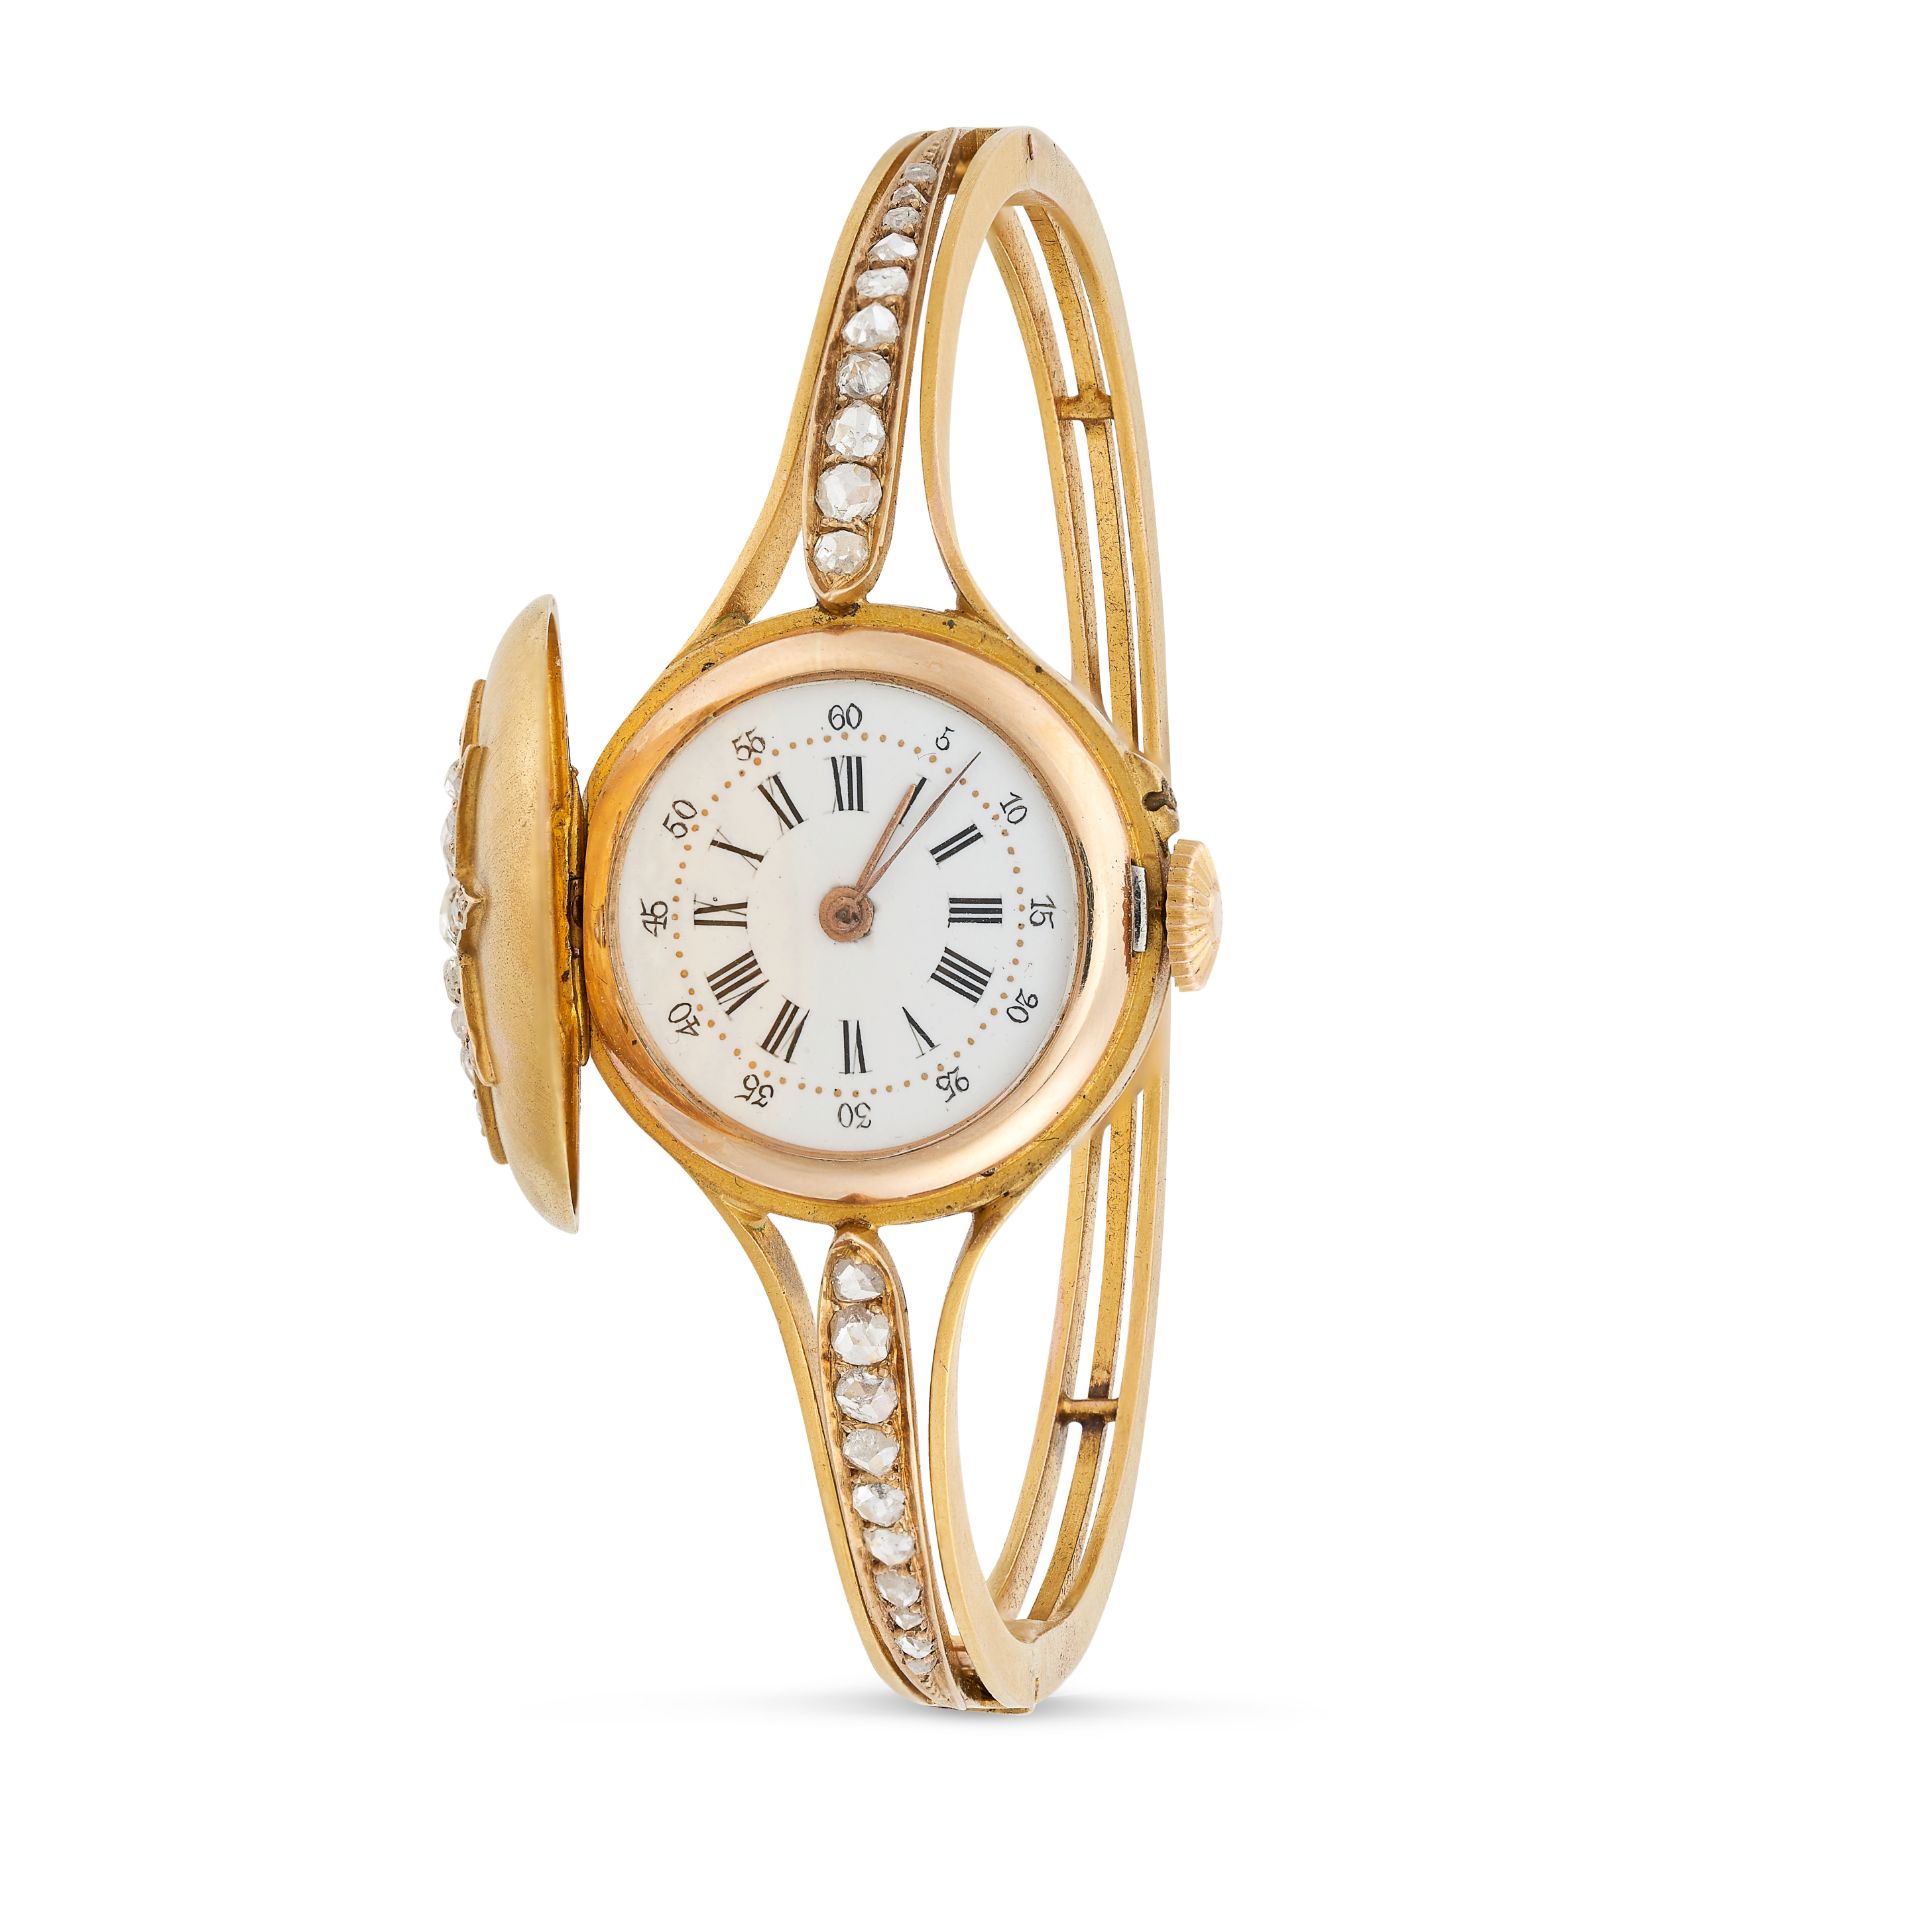 A FINE ANTIQUE DIAMOND WATCH BANGLE in yellow gold, the circular dial with hinged cover set with ... - Image 2 of 2